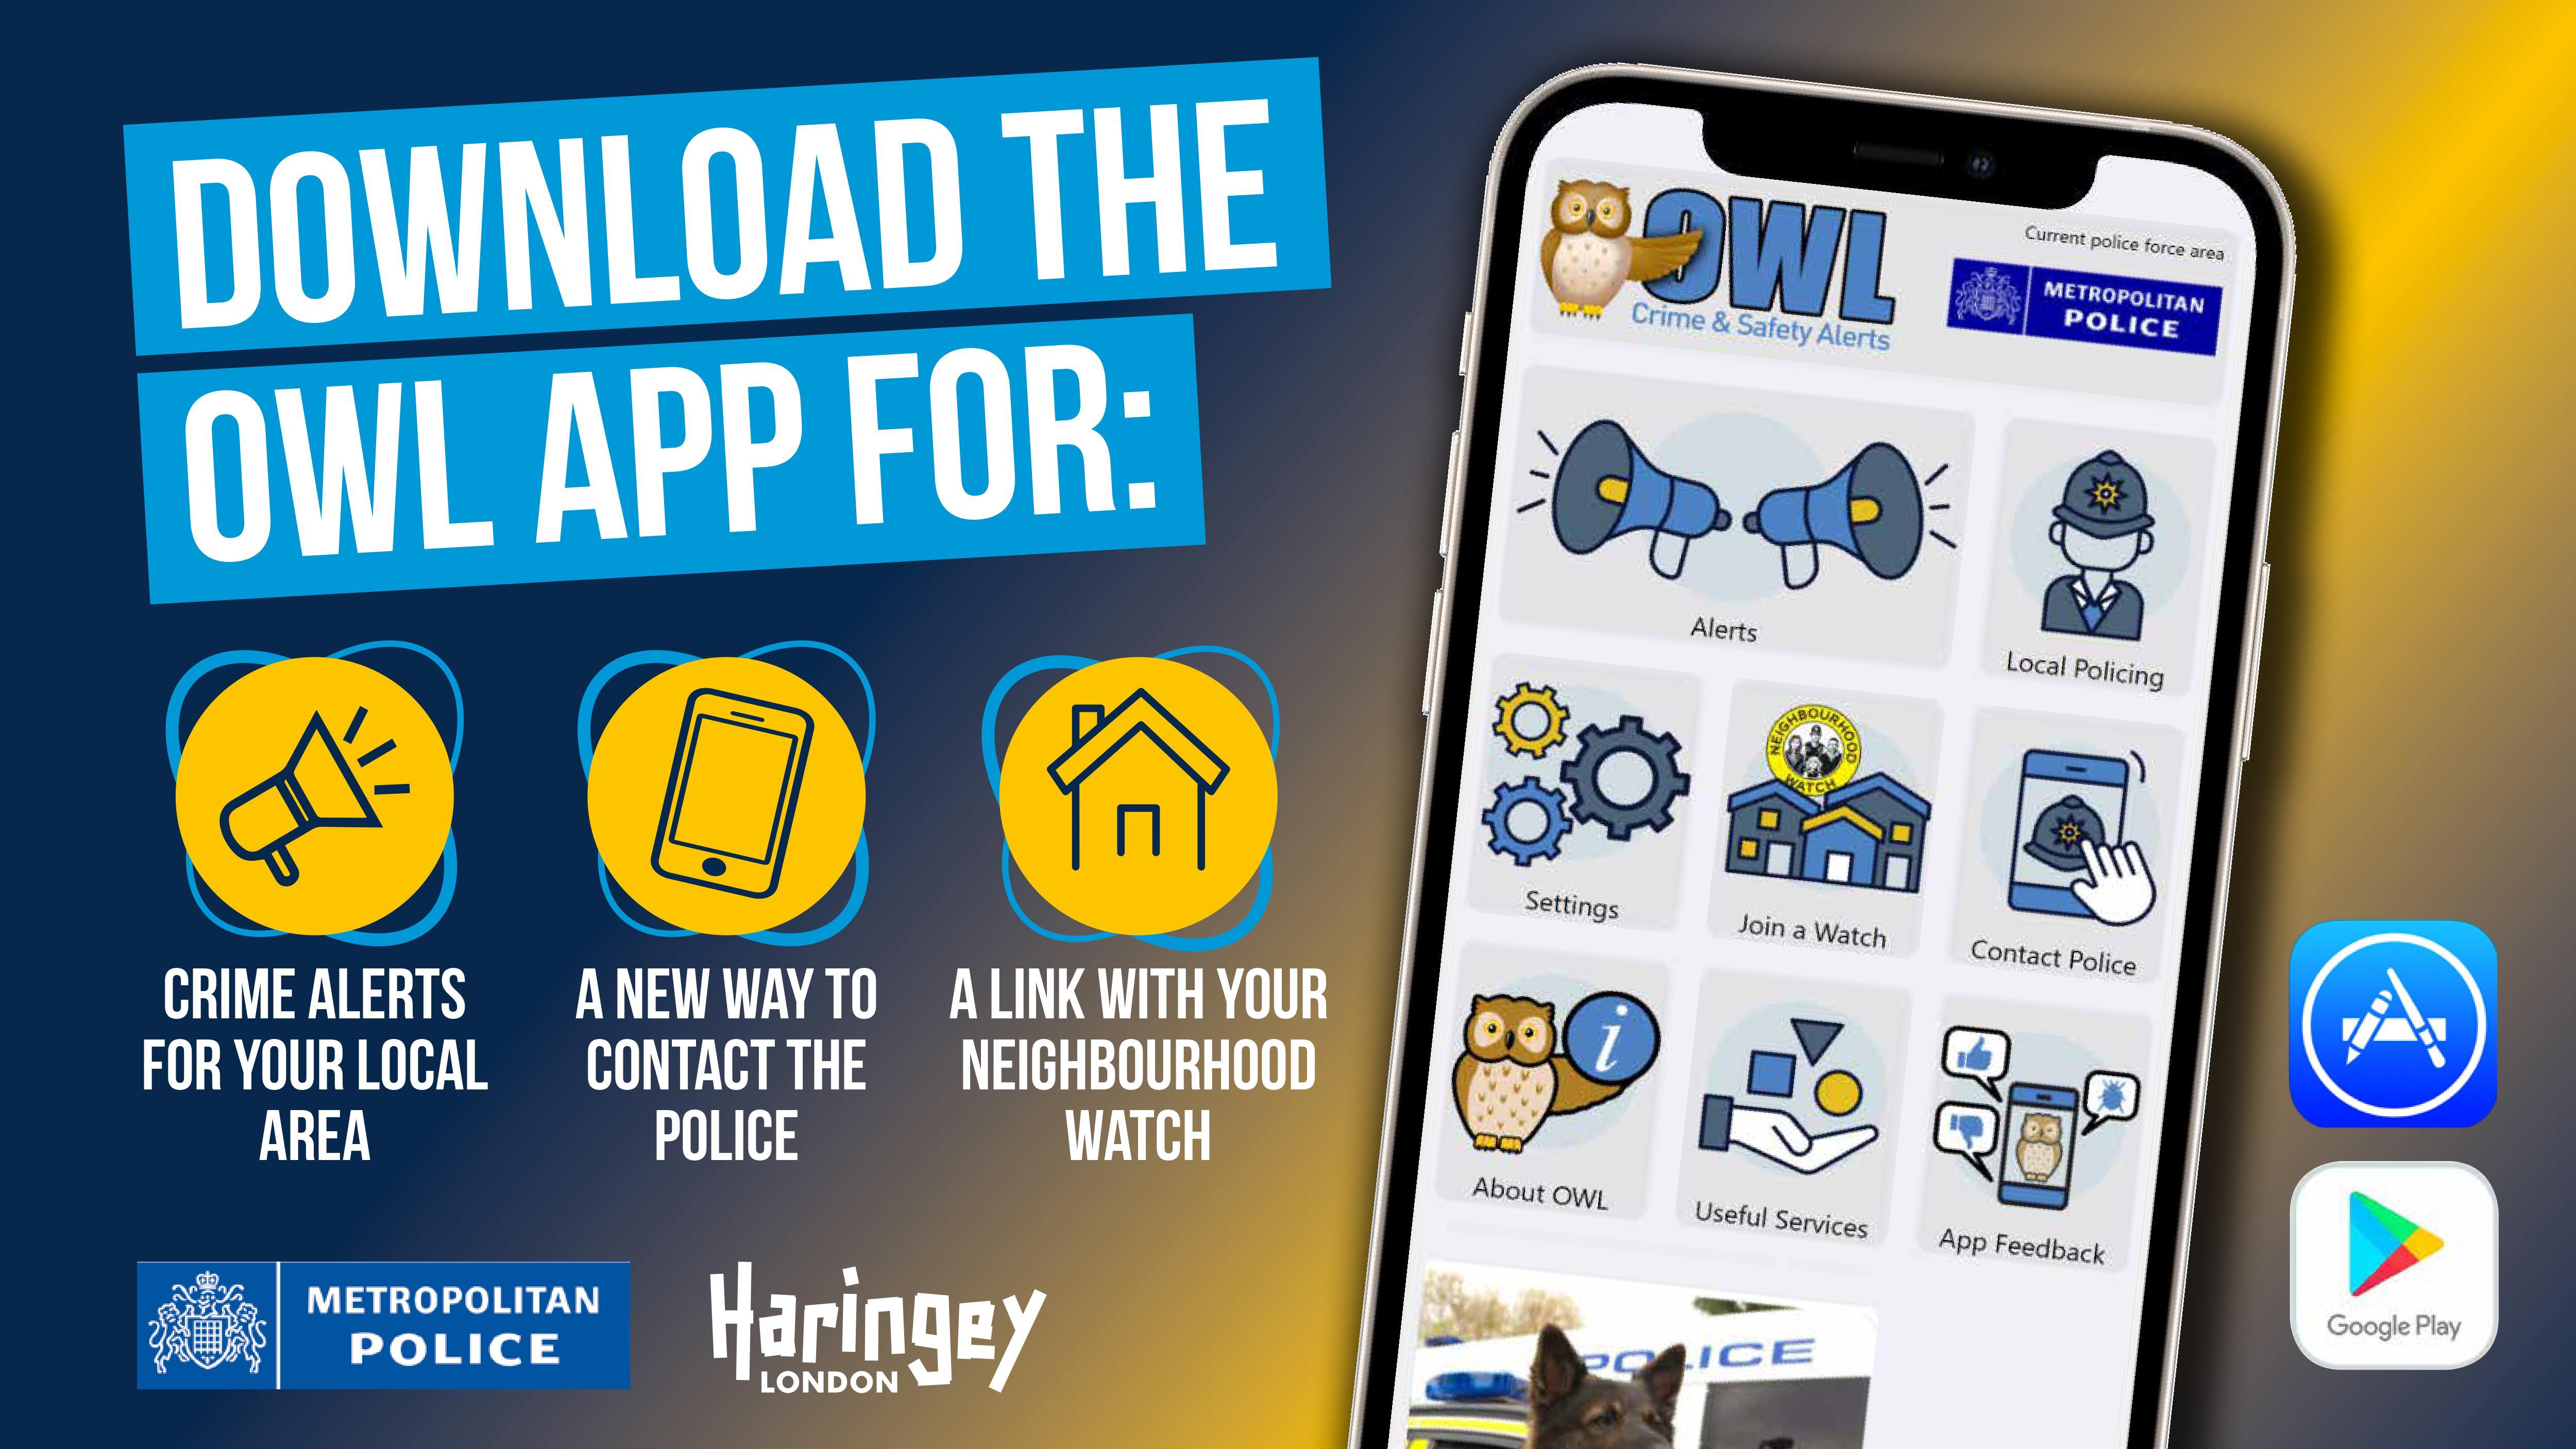 The OWL app is a new way to get updates from and communicate with the police